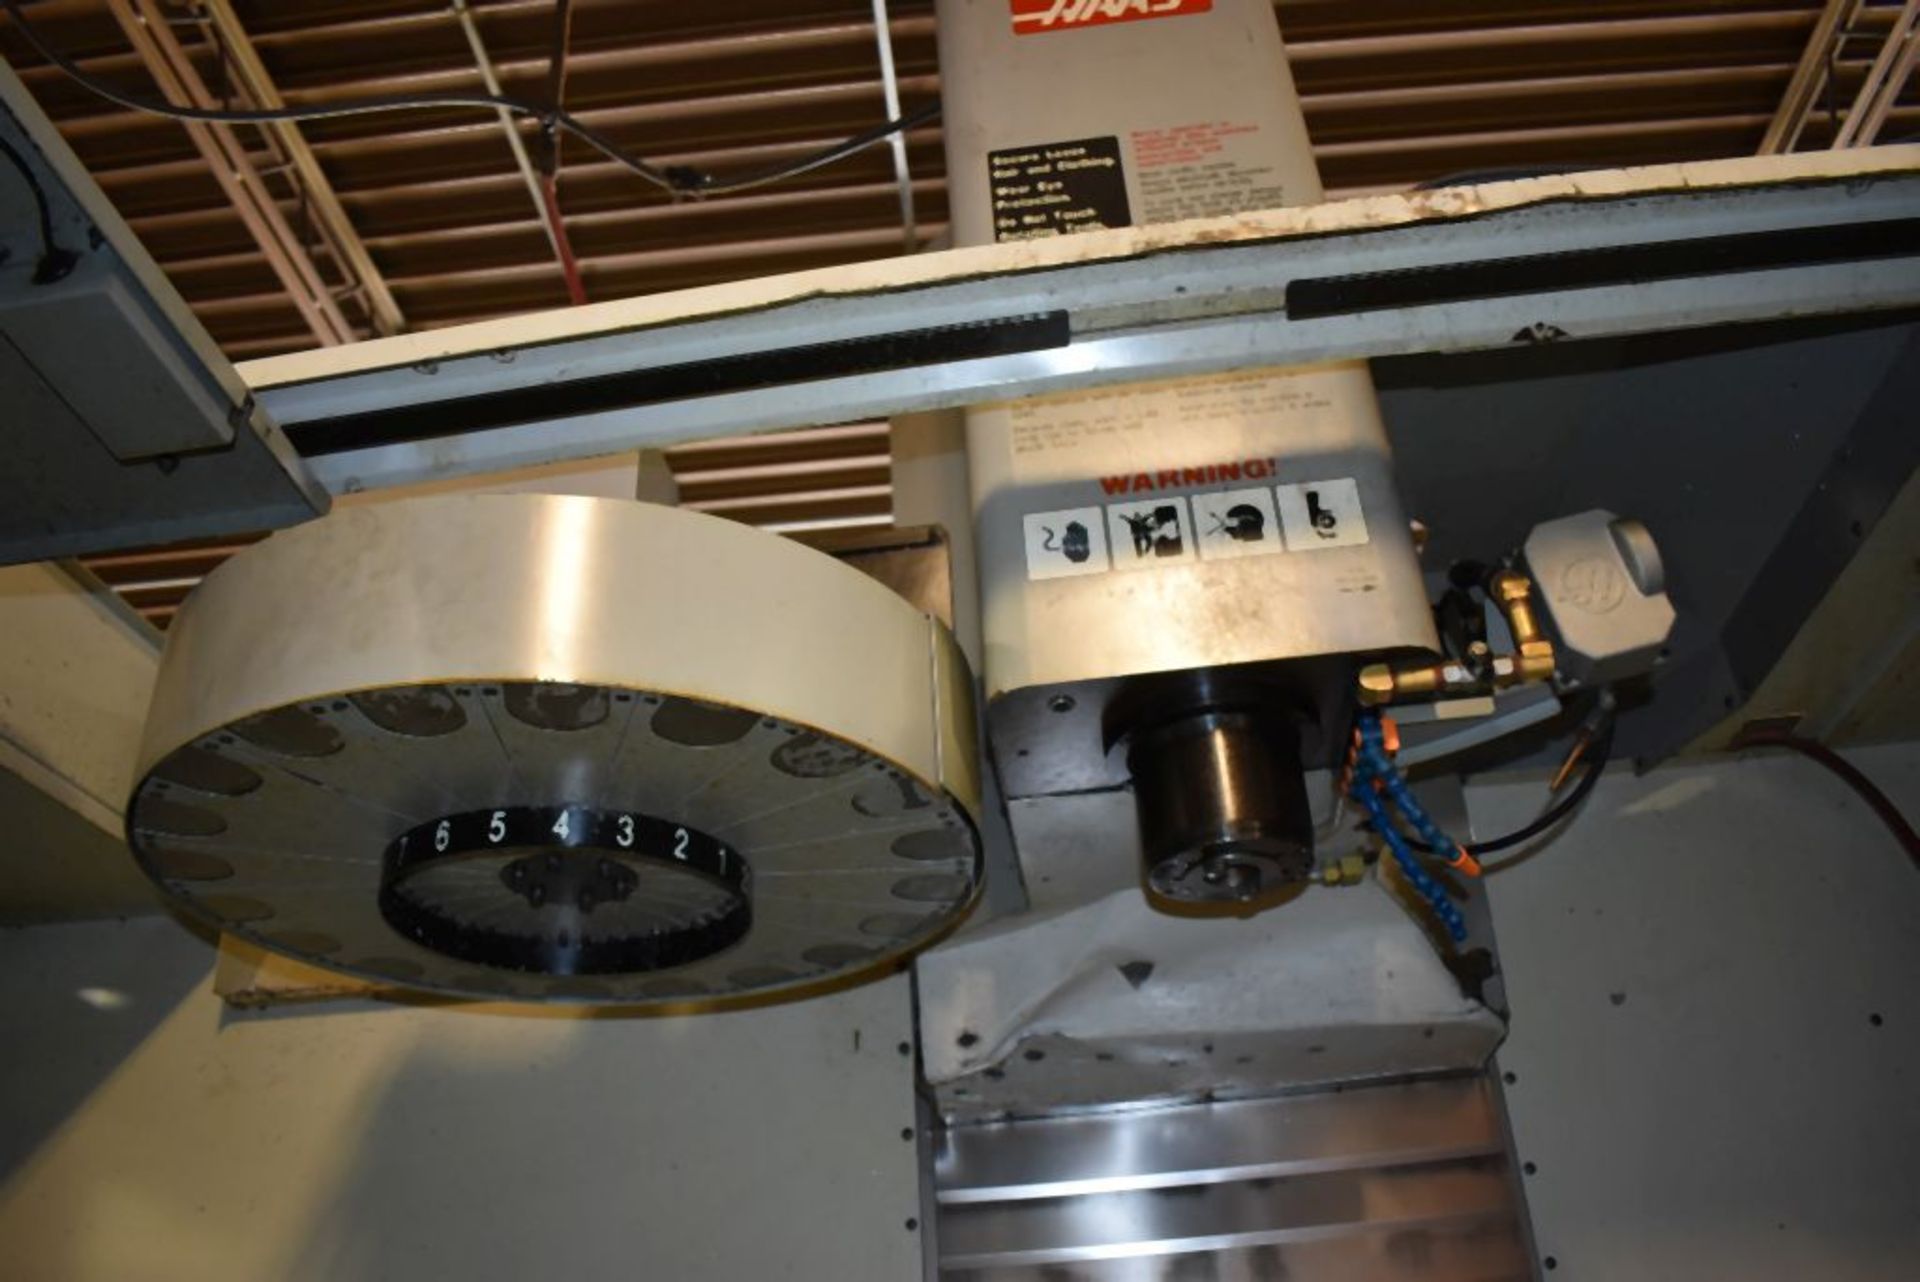 2005 HAAS CNC VERTICAL MACHINING CENTER, MODEL VF-5B/40, S/N: 45046, 52" x 23" T-SLOT TABLE, - Image 3 of 6